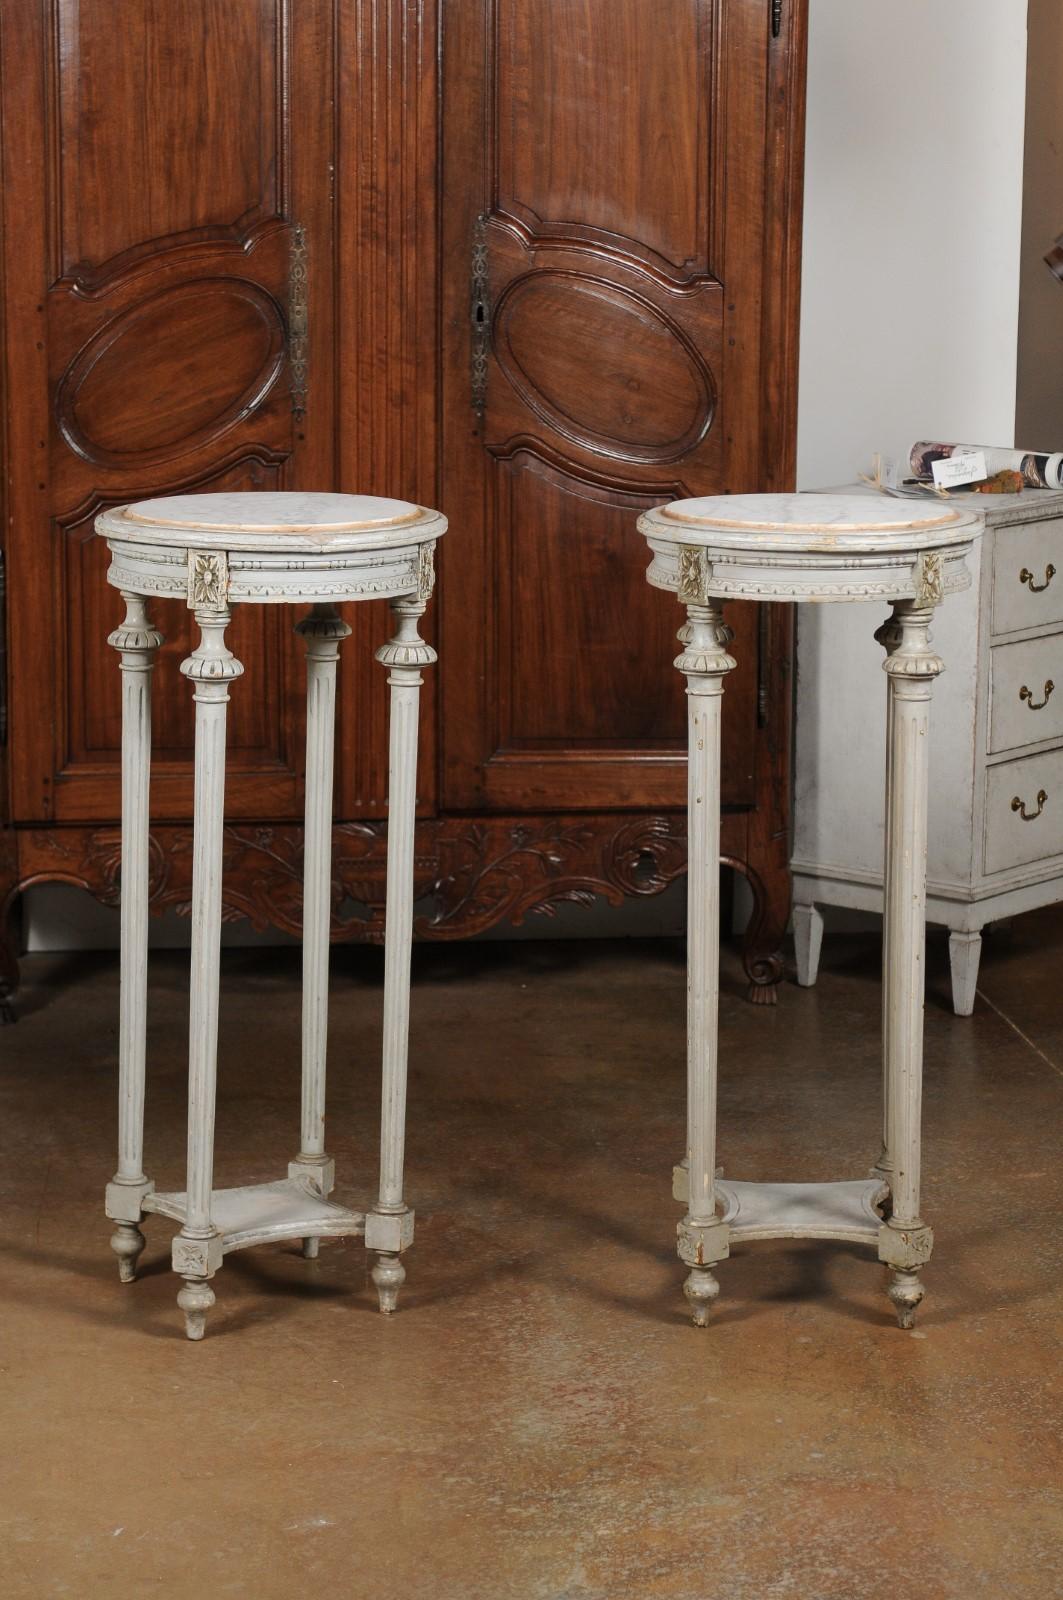 A pair of Swedish neoclassical painted wood pedestal stands from the early 19th century, with Carrara marble tops. Born in Sweden during the second quarter of the 19th century, each of this pair of neoclassical stands features a circular top made of